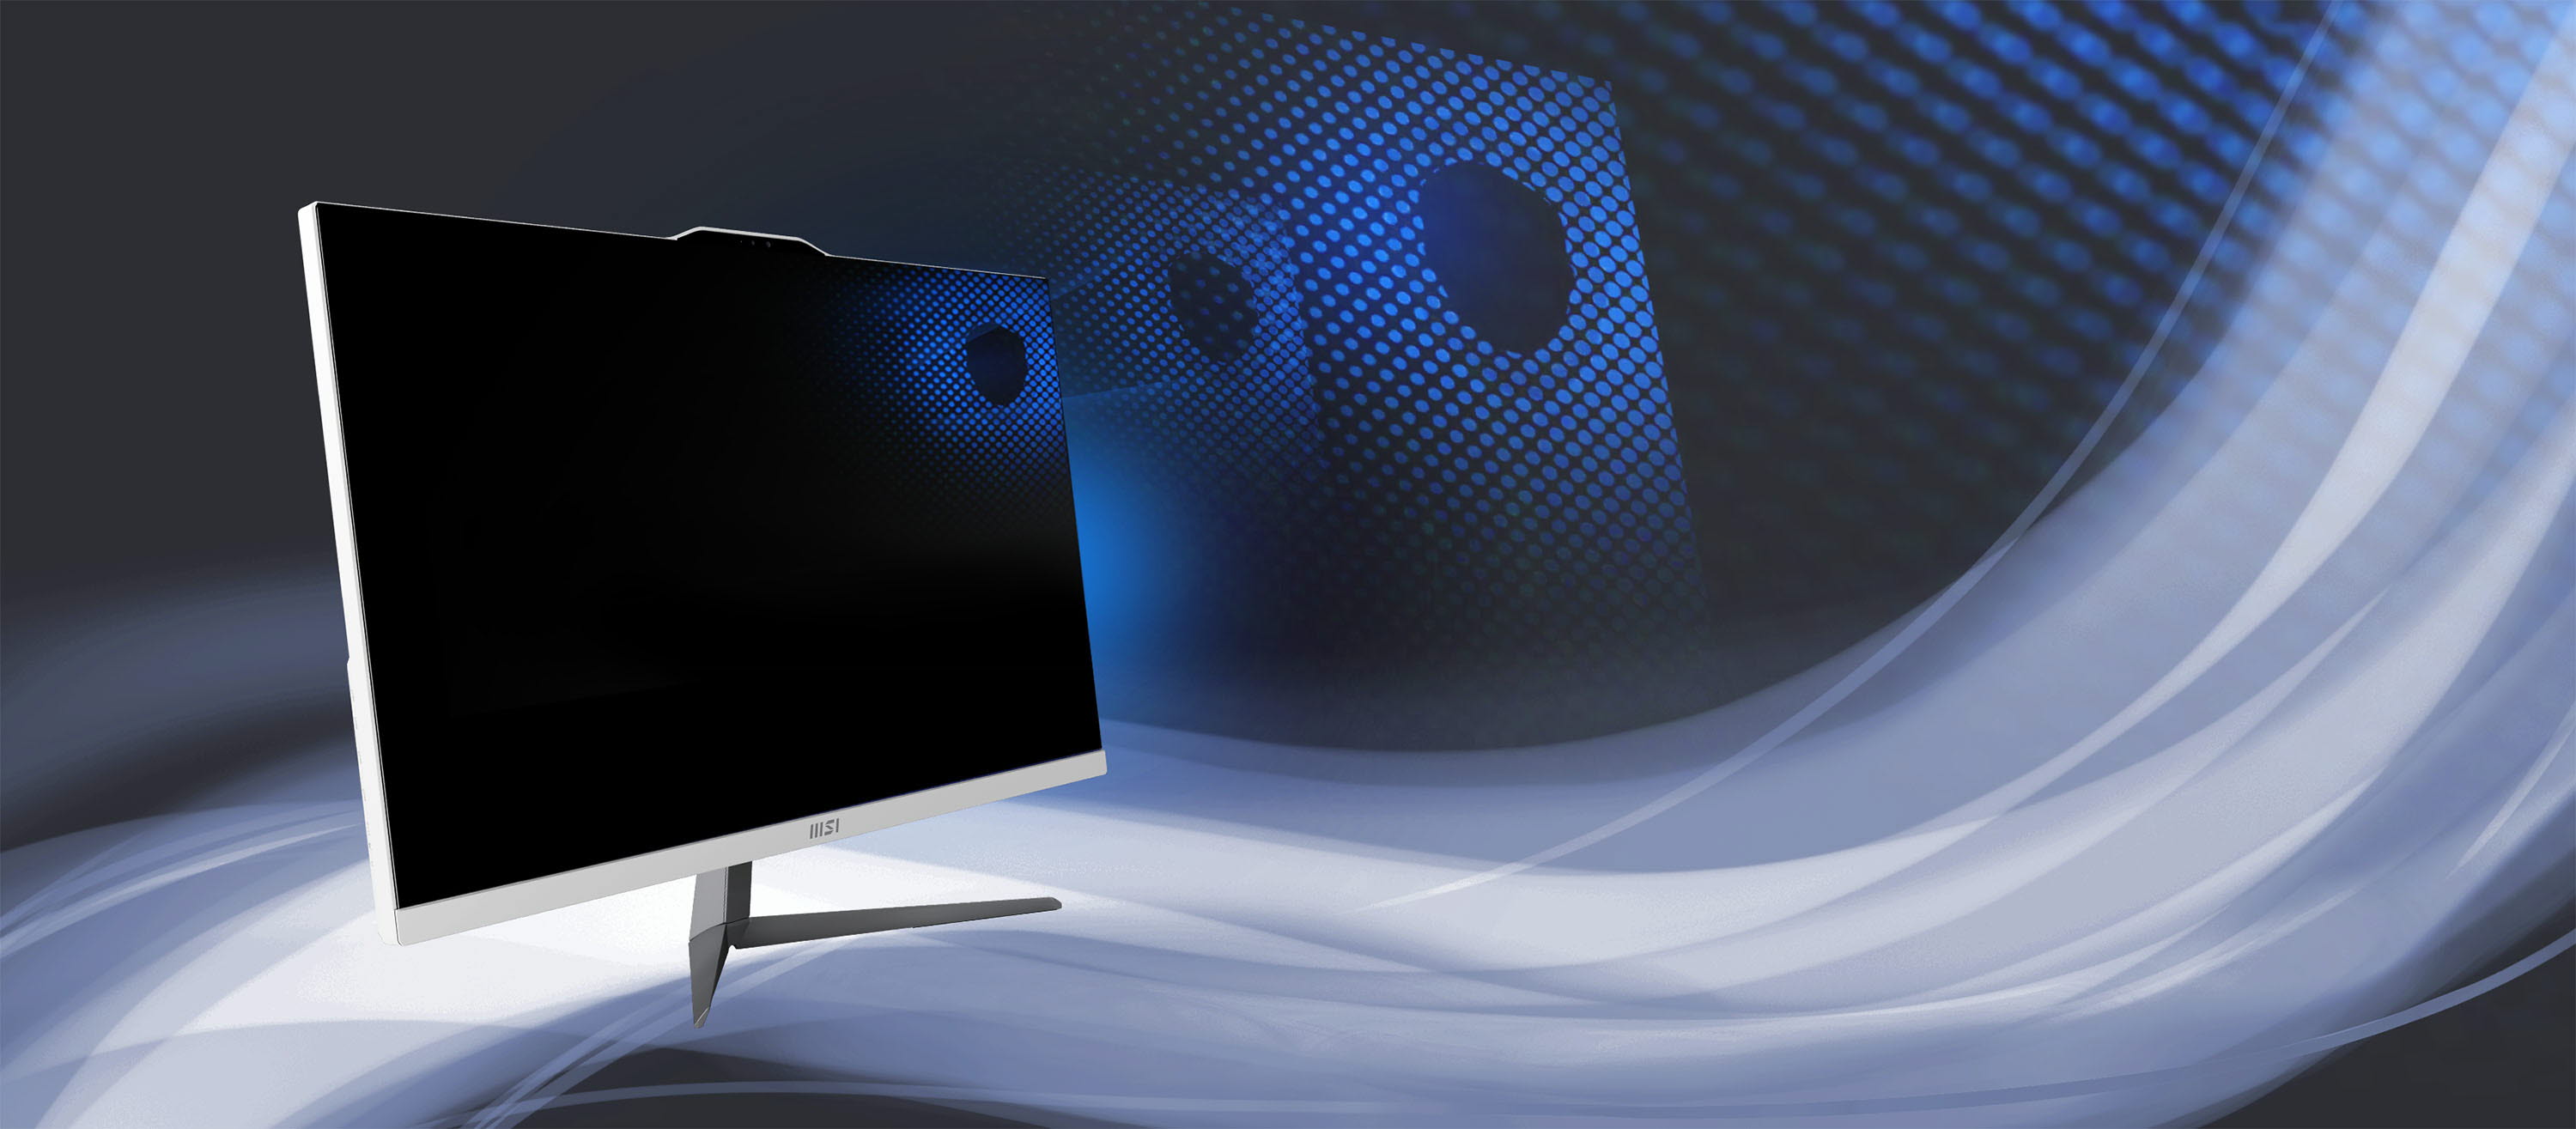 Blue Light and Its Impact on Eye Health - MSI All-in-One PC